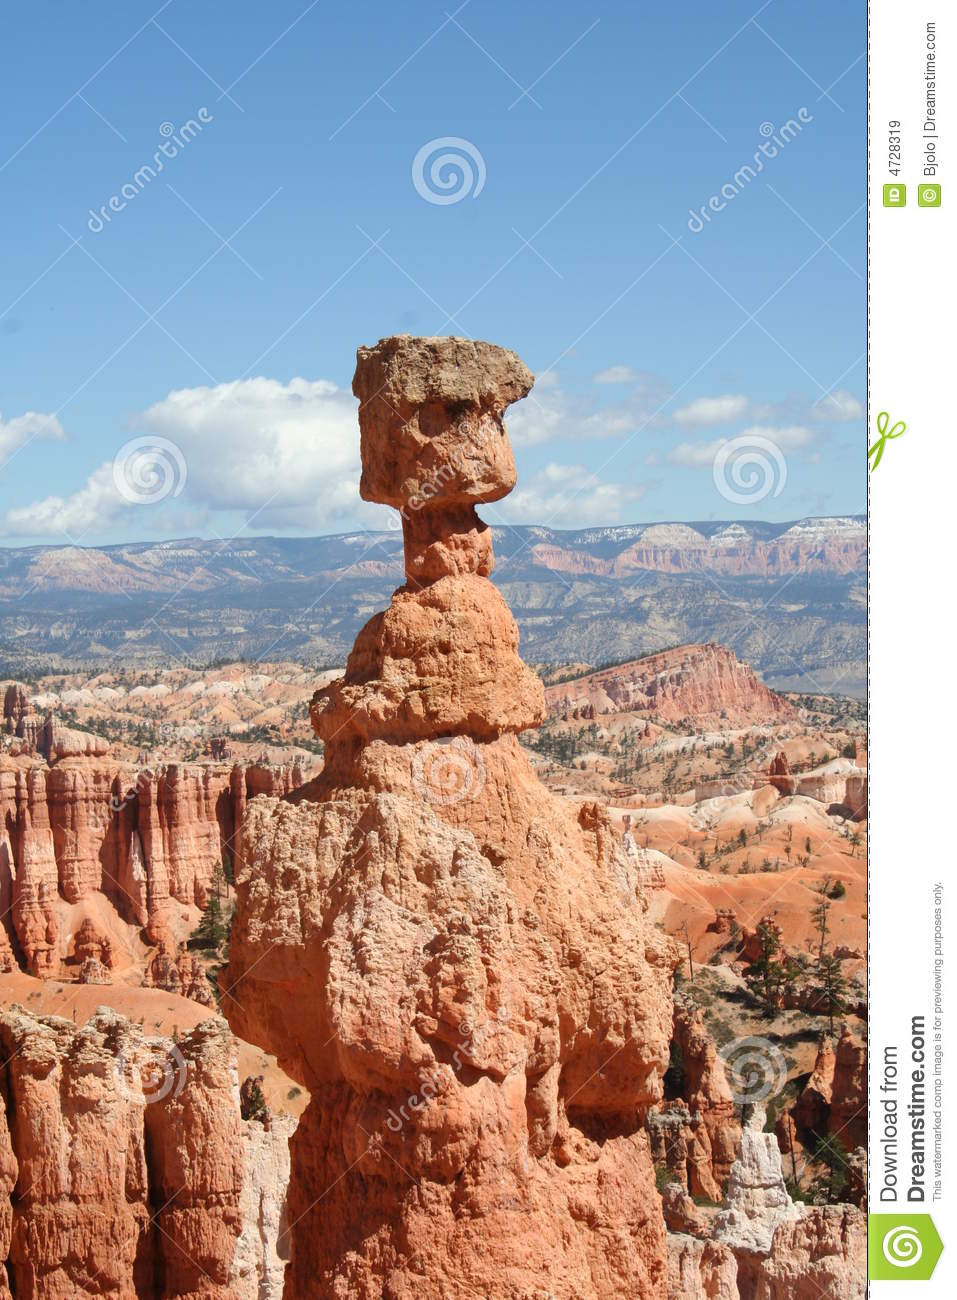 Rock In Bryce Canyon National Park Royalty Free Stock Images.